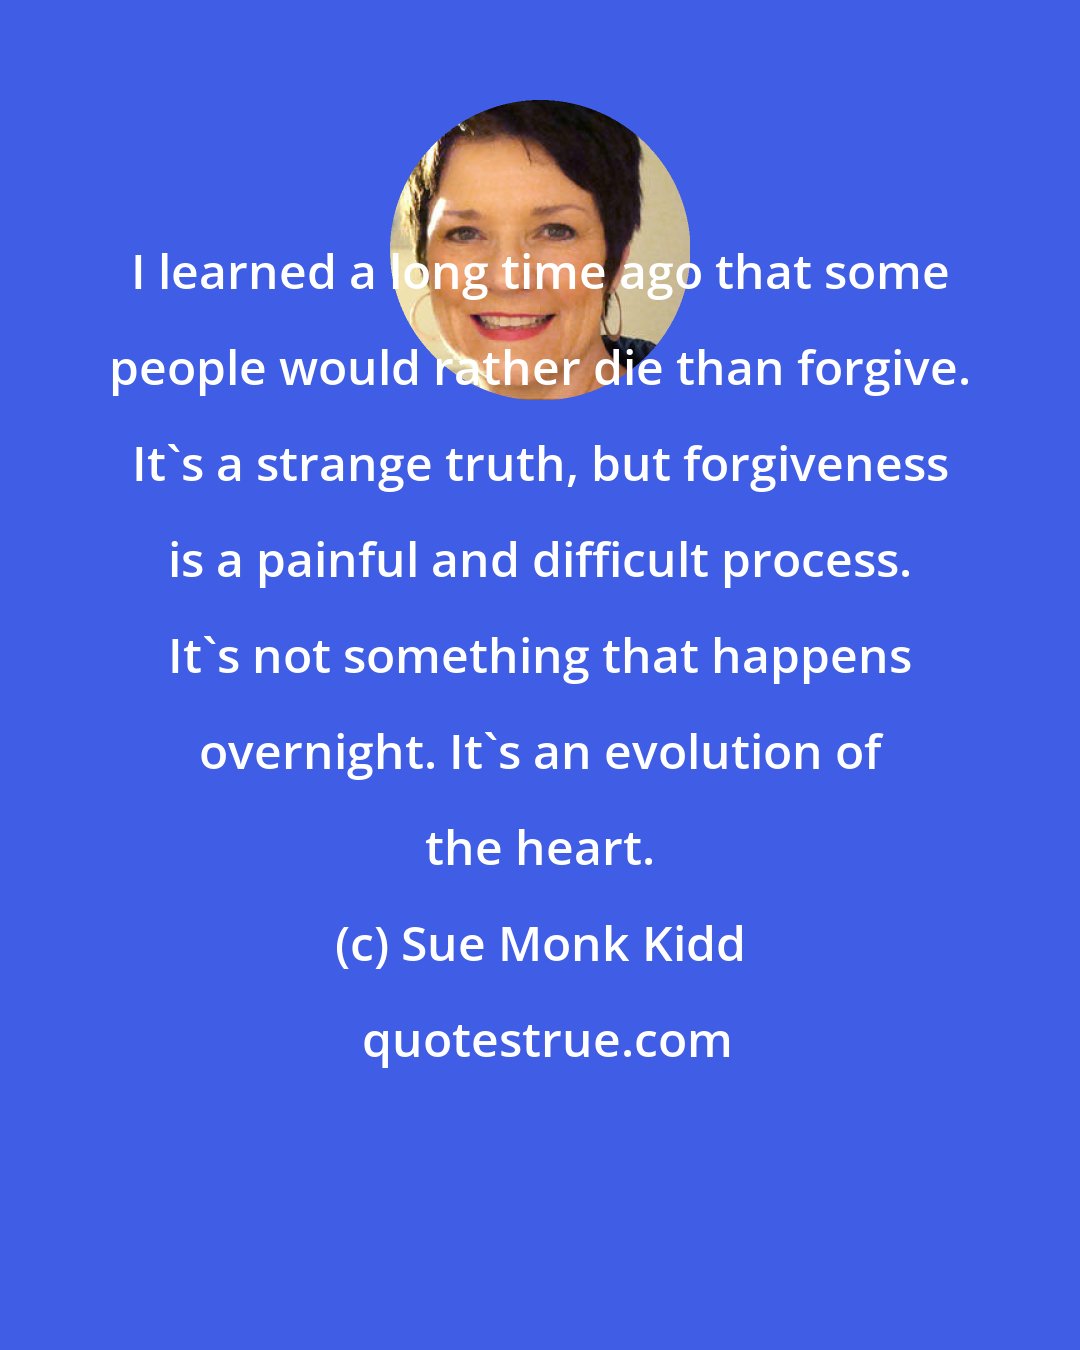 Sue Monk Kidd: I learned a long time ago that some people would rather die than forgive. It's a strange truth, but forgiveness is a painful and difficult process. It's not something that happens overnight. It's an evolution of the heart.